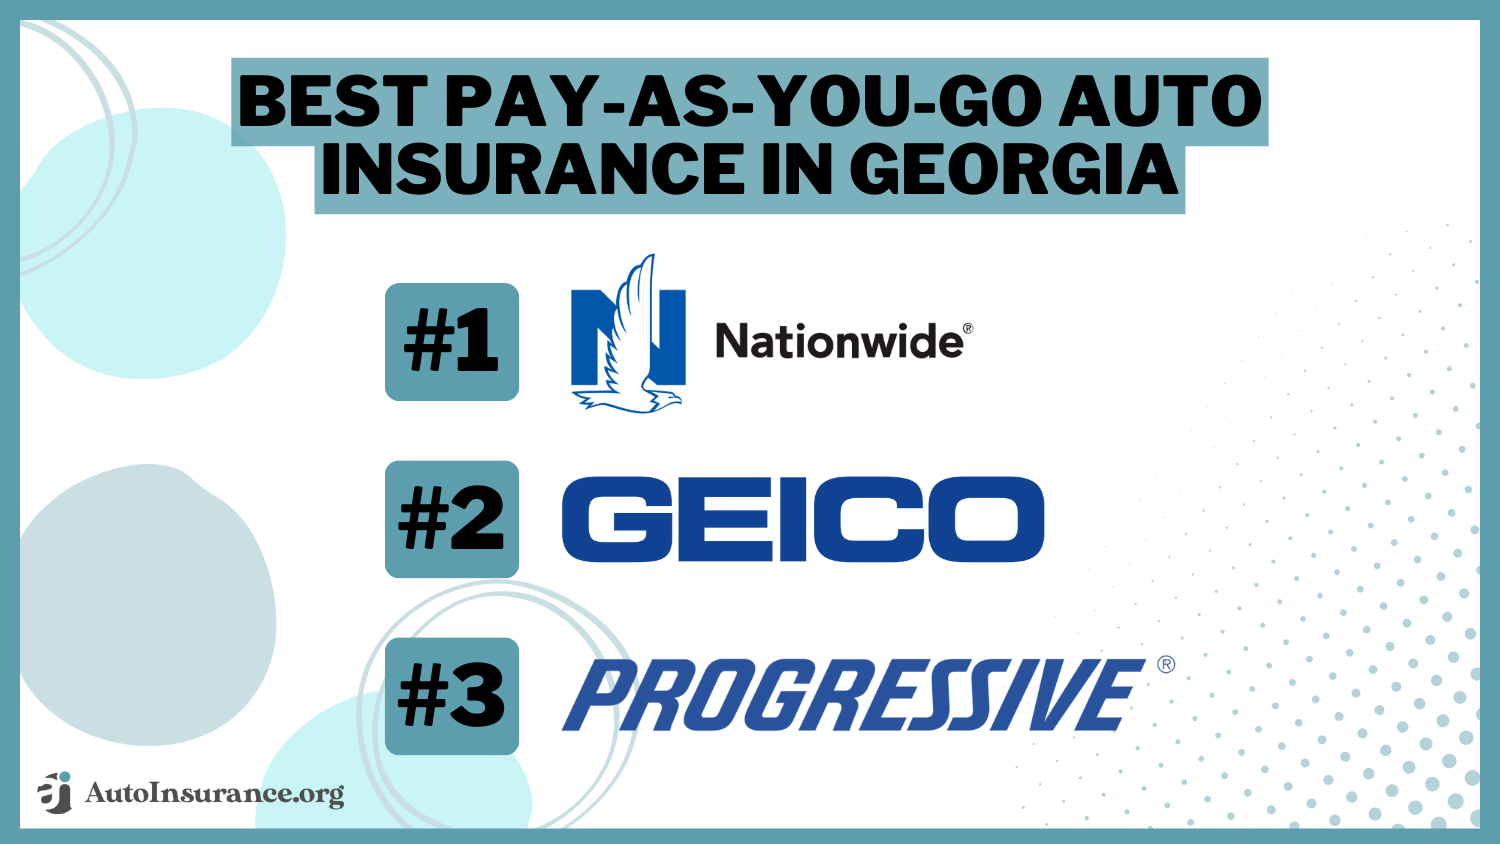 Best Pay-As-You-Go Auto Insurance in Georgia: Nationwide, Geico, Progressive